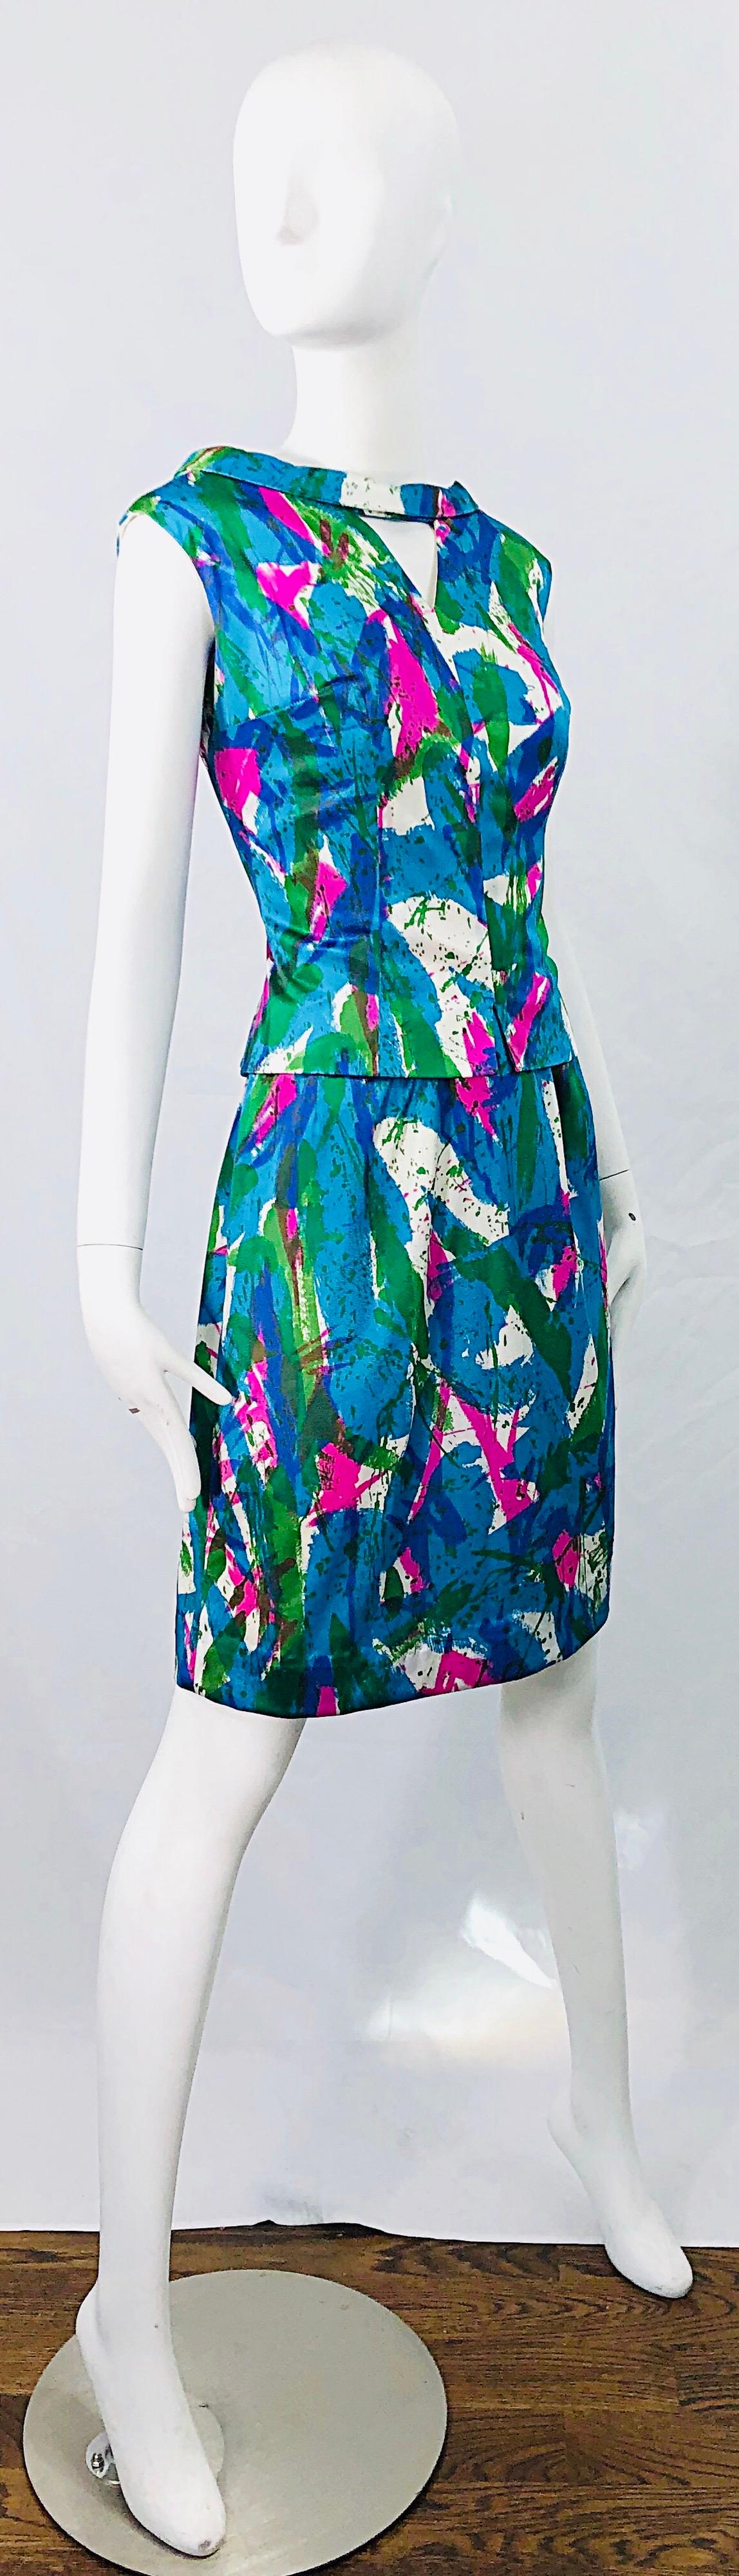 Chic 1960s Neon Abstract Print Two Piece Vintage 60s Sheath Dress + Top Blouse  For Sale 6